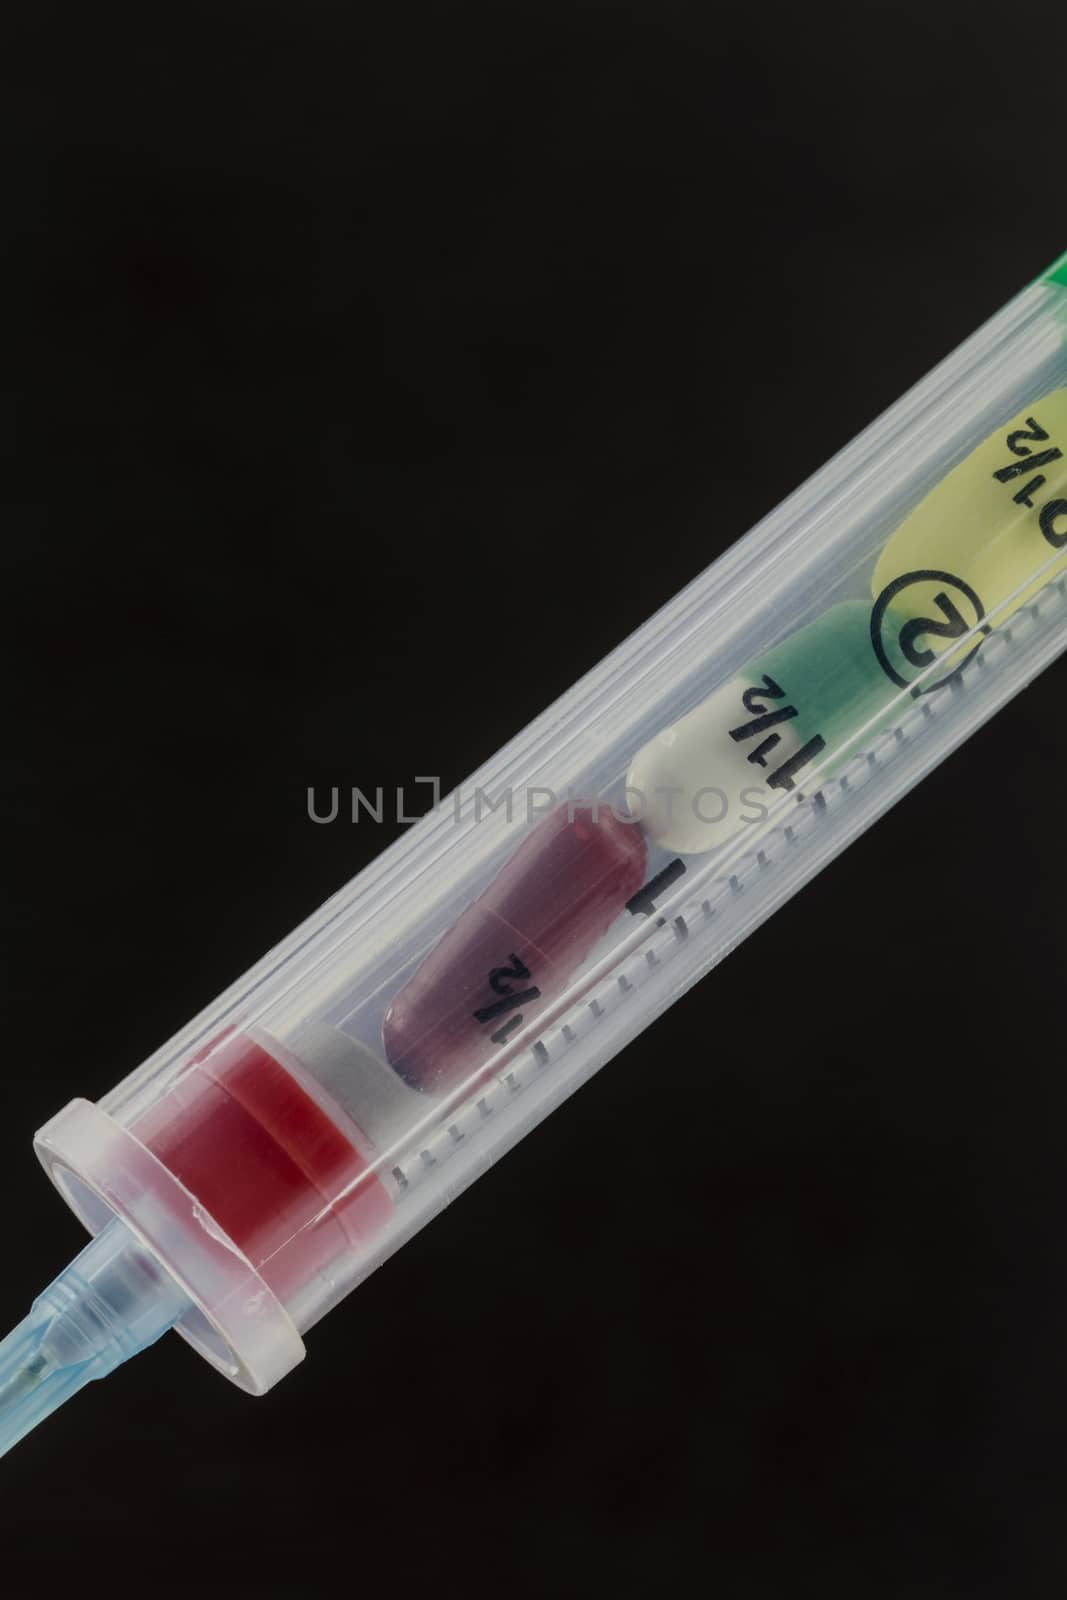 Intravenous syringe filled with a dosage of colorful pills on black.